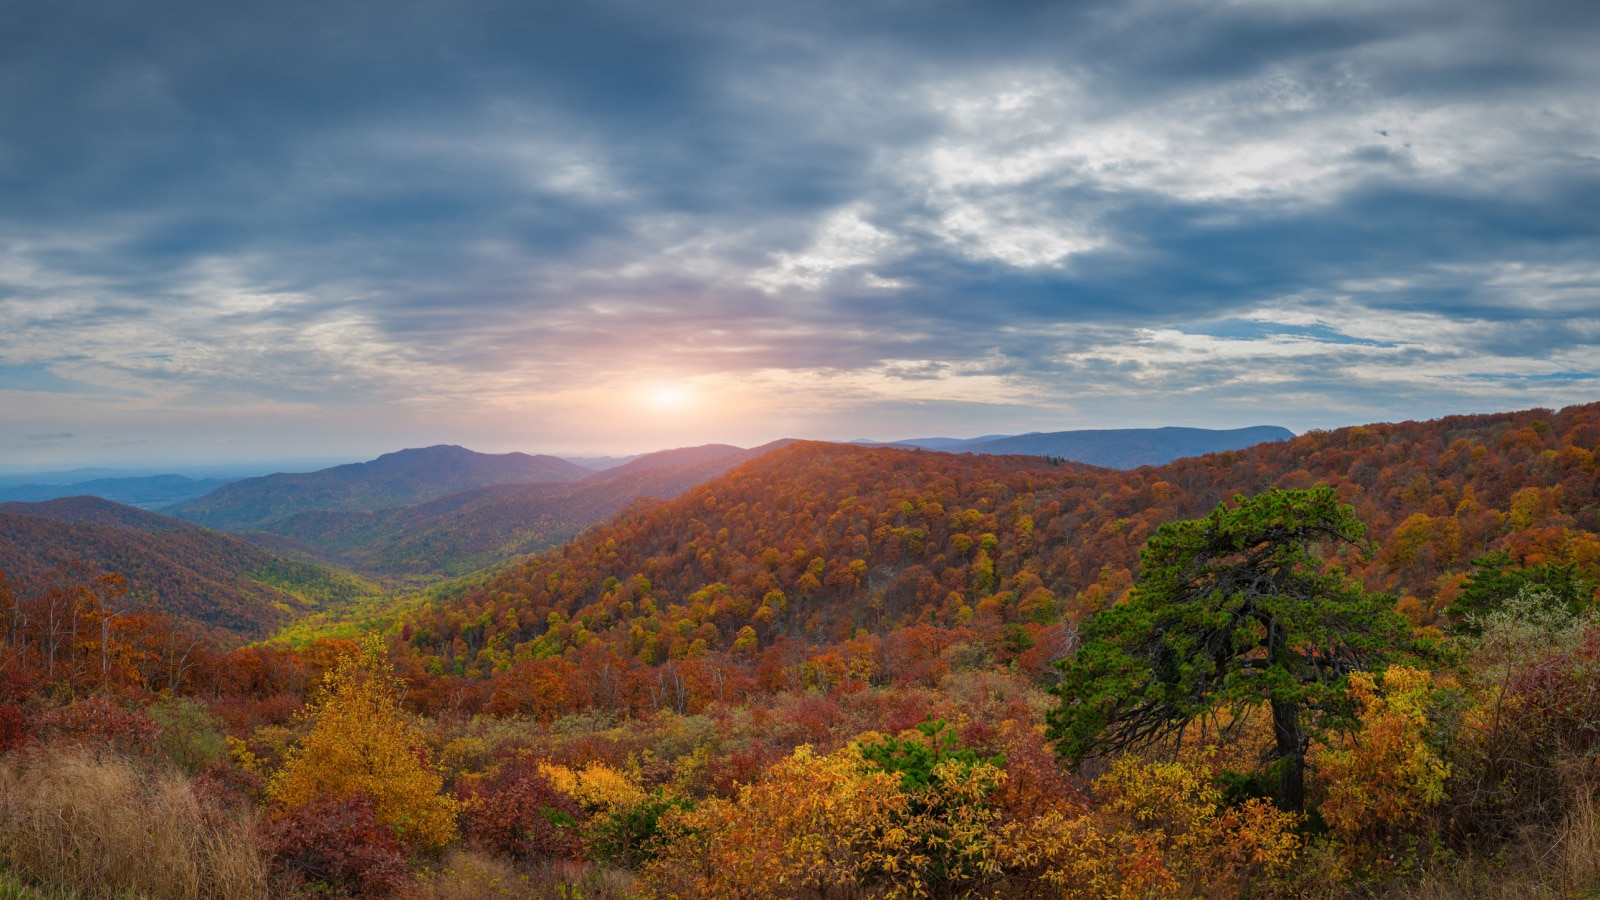 An overlook at Shenandoah National Park in Virginia with autumn colors.